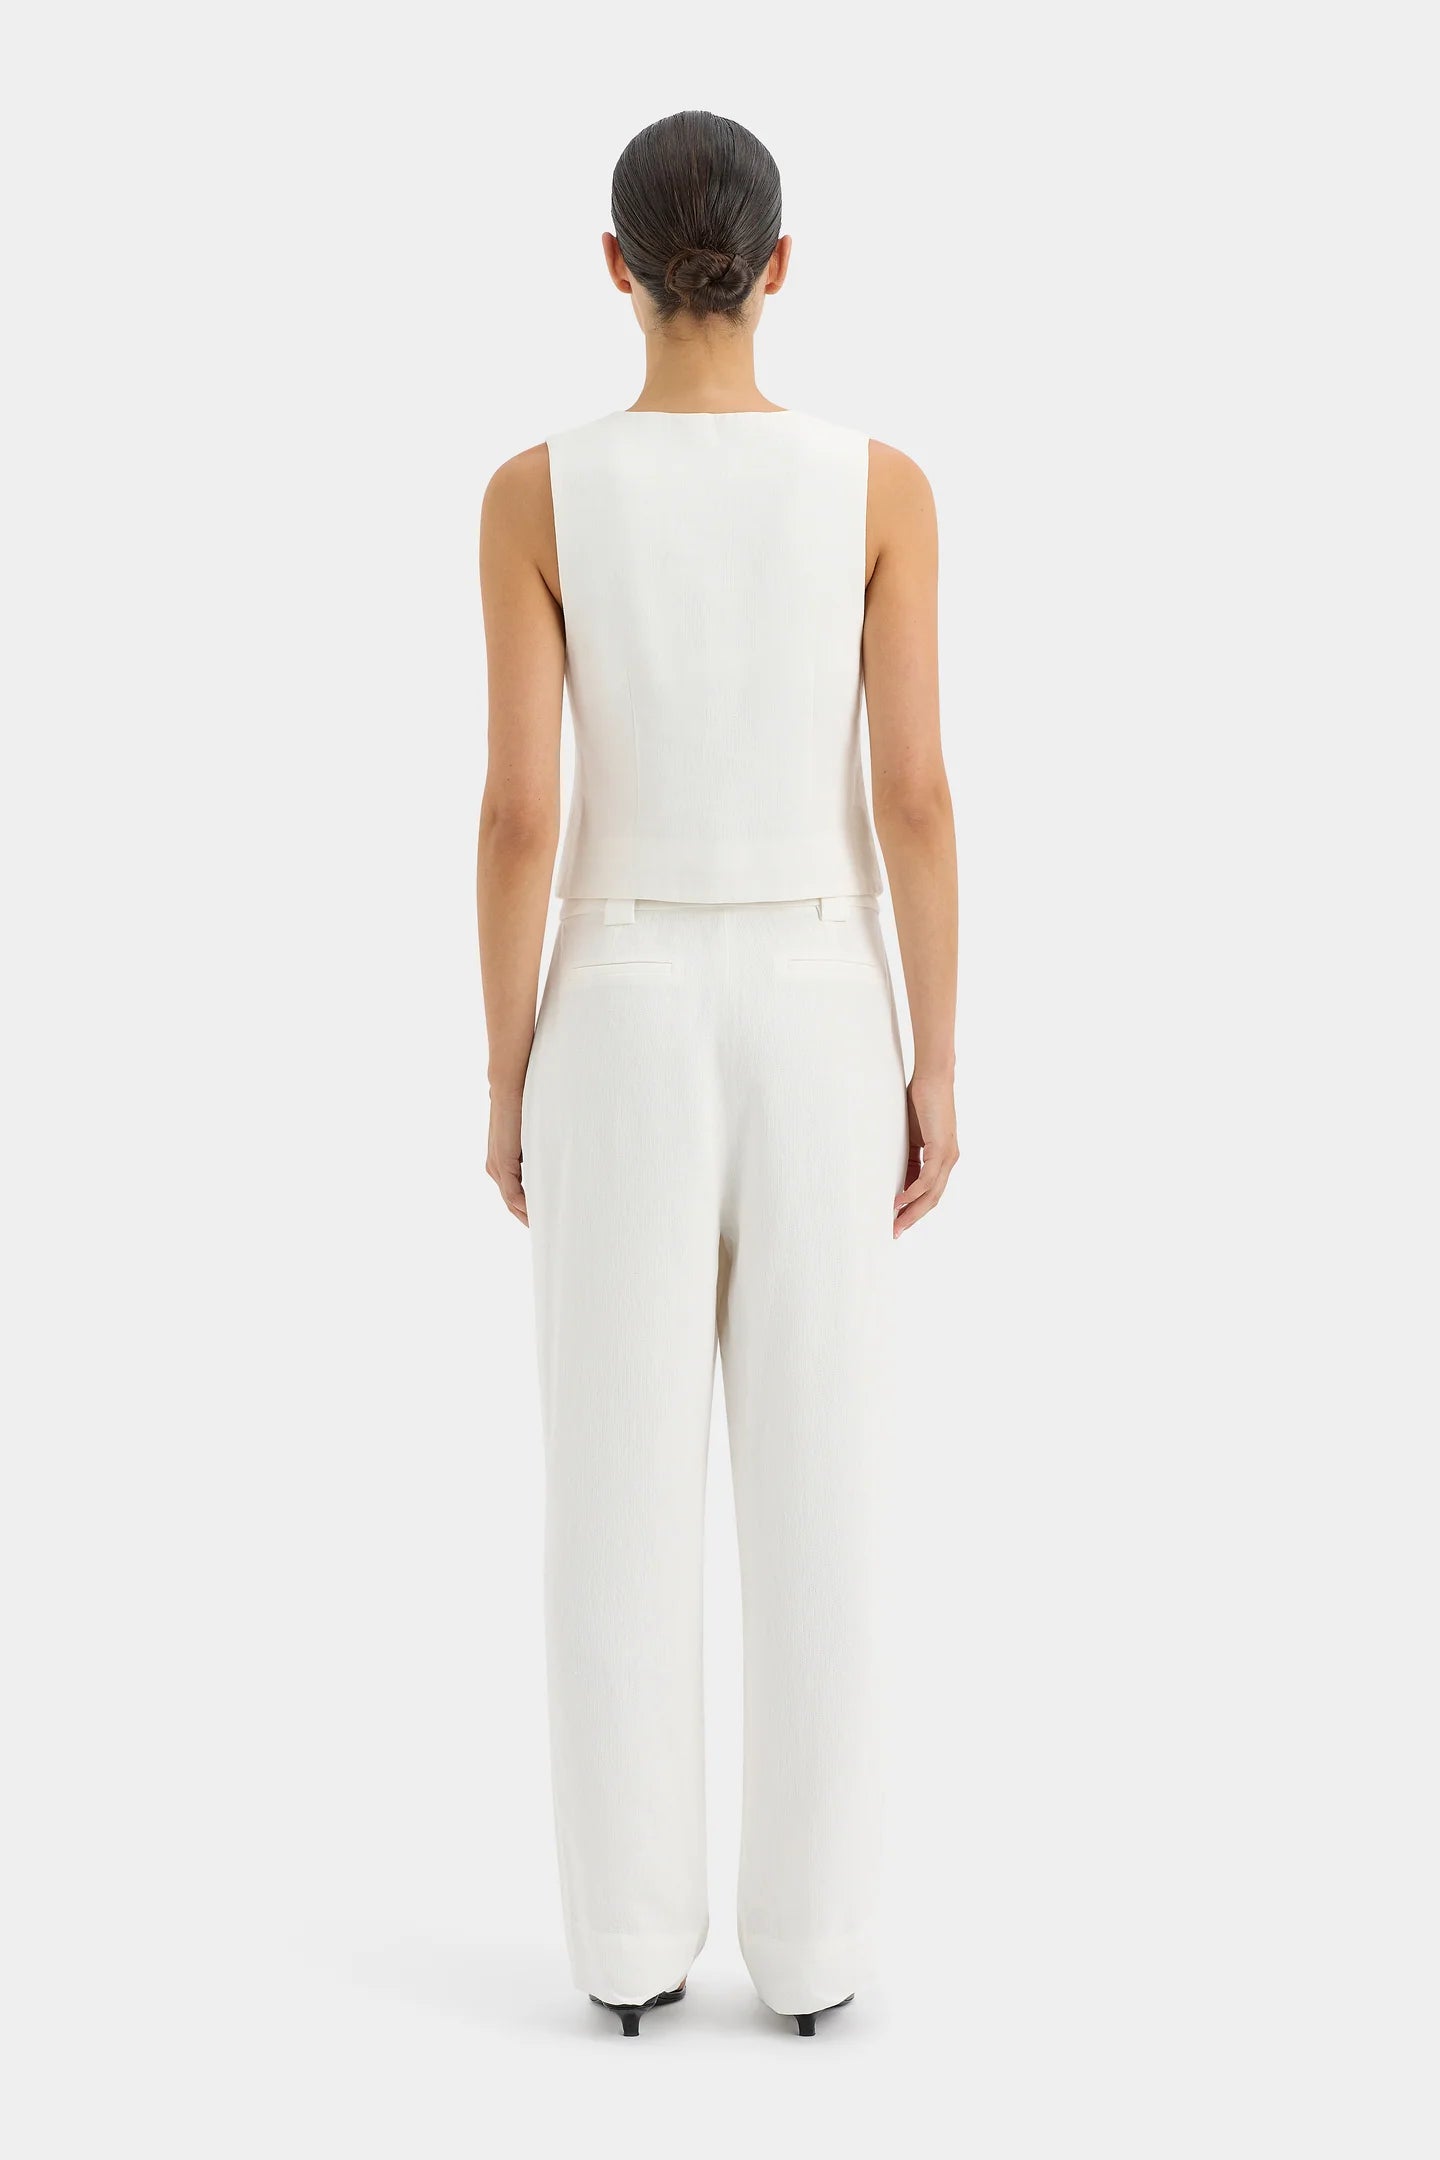 SIR. Clemence Tailored Vest - Ivory